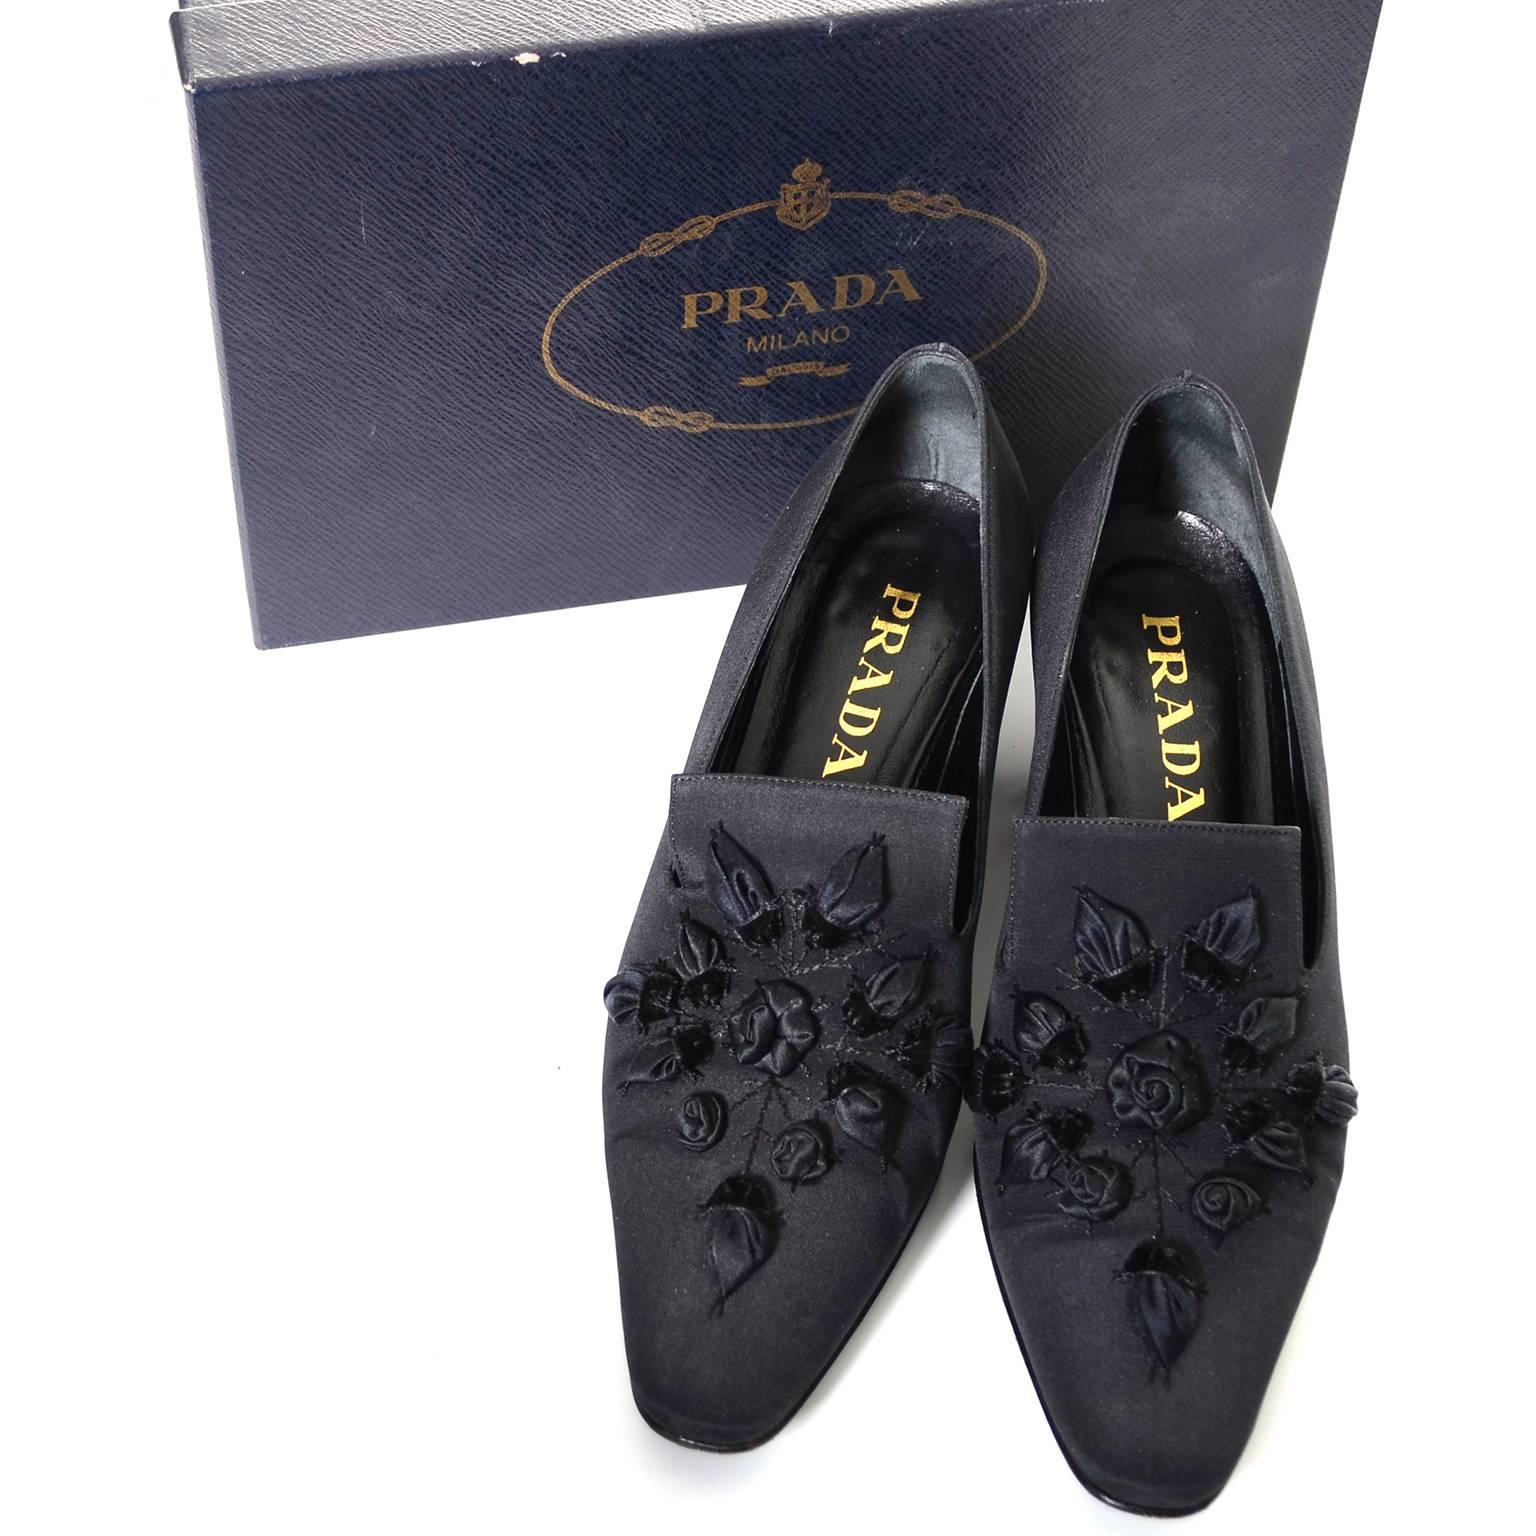 These vintage black Prada heels have beautiful roses and come with their original box.  They are a size 37.5 or US size 7 and have 2 and 1/4" heels.  These great vintage shoes measure 3.5" at the widest part of the outside of the soles and